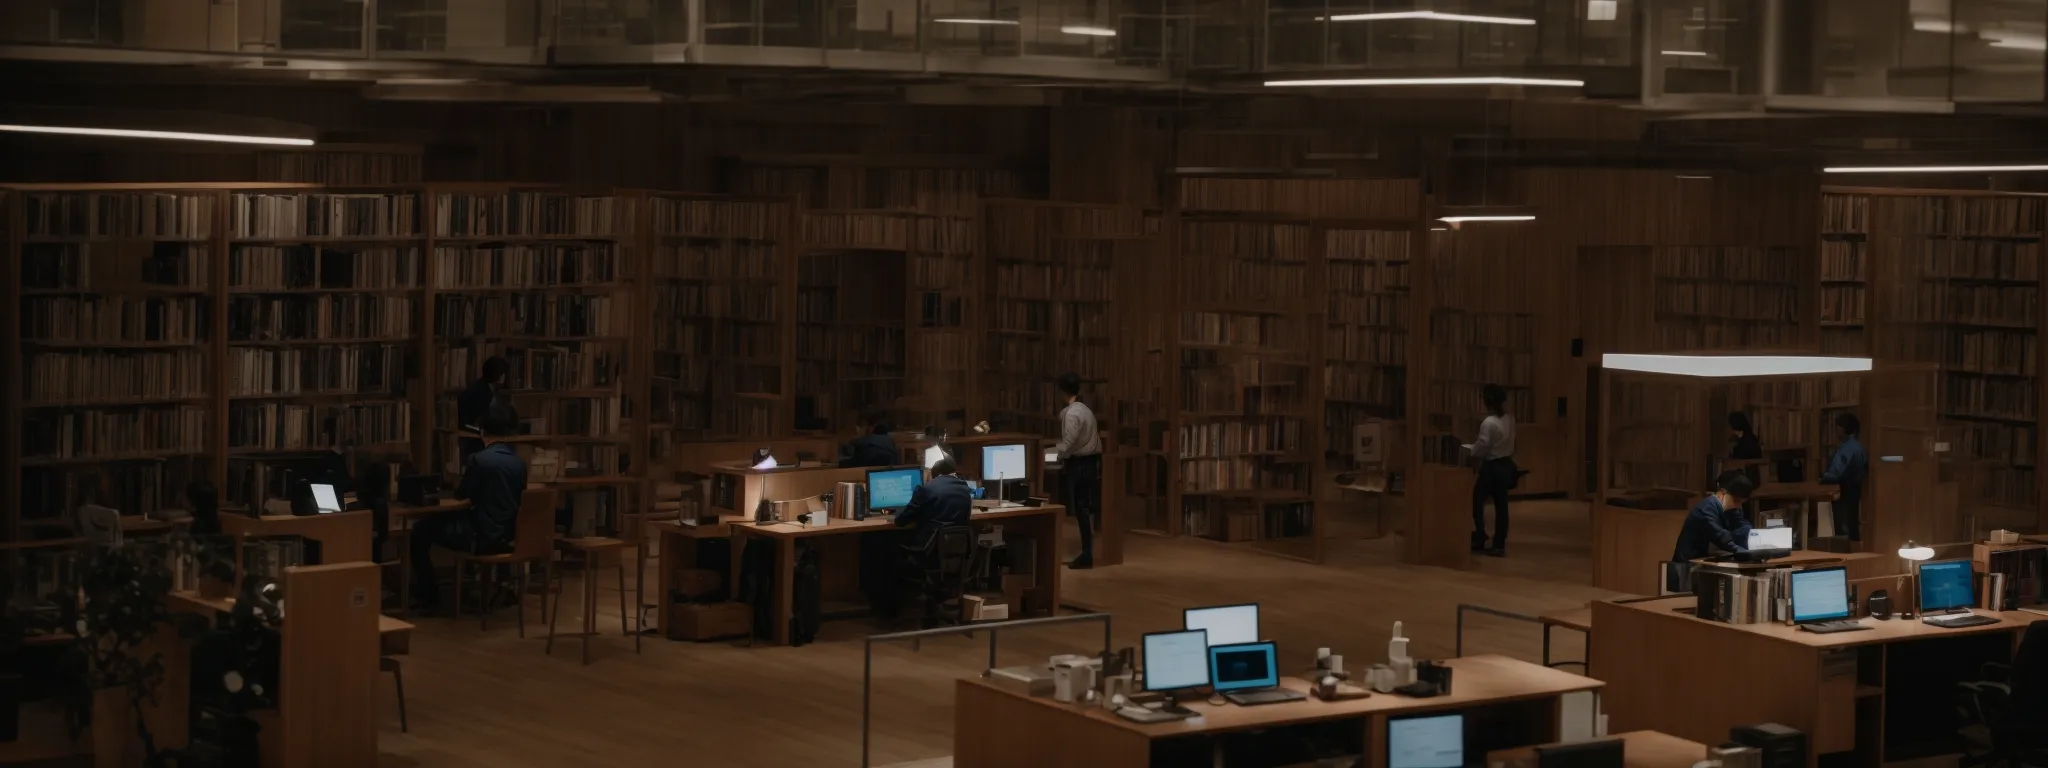 a wide-open library hall with visitors using computers to conduct research amidst towering bookshelves.